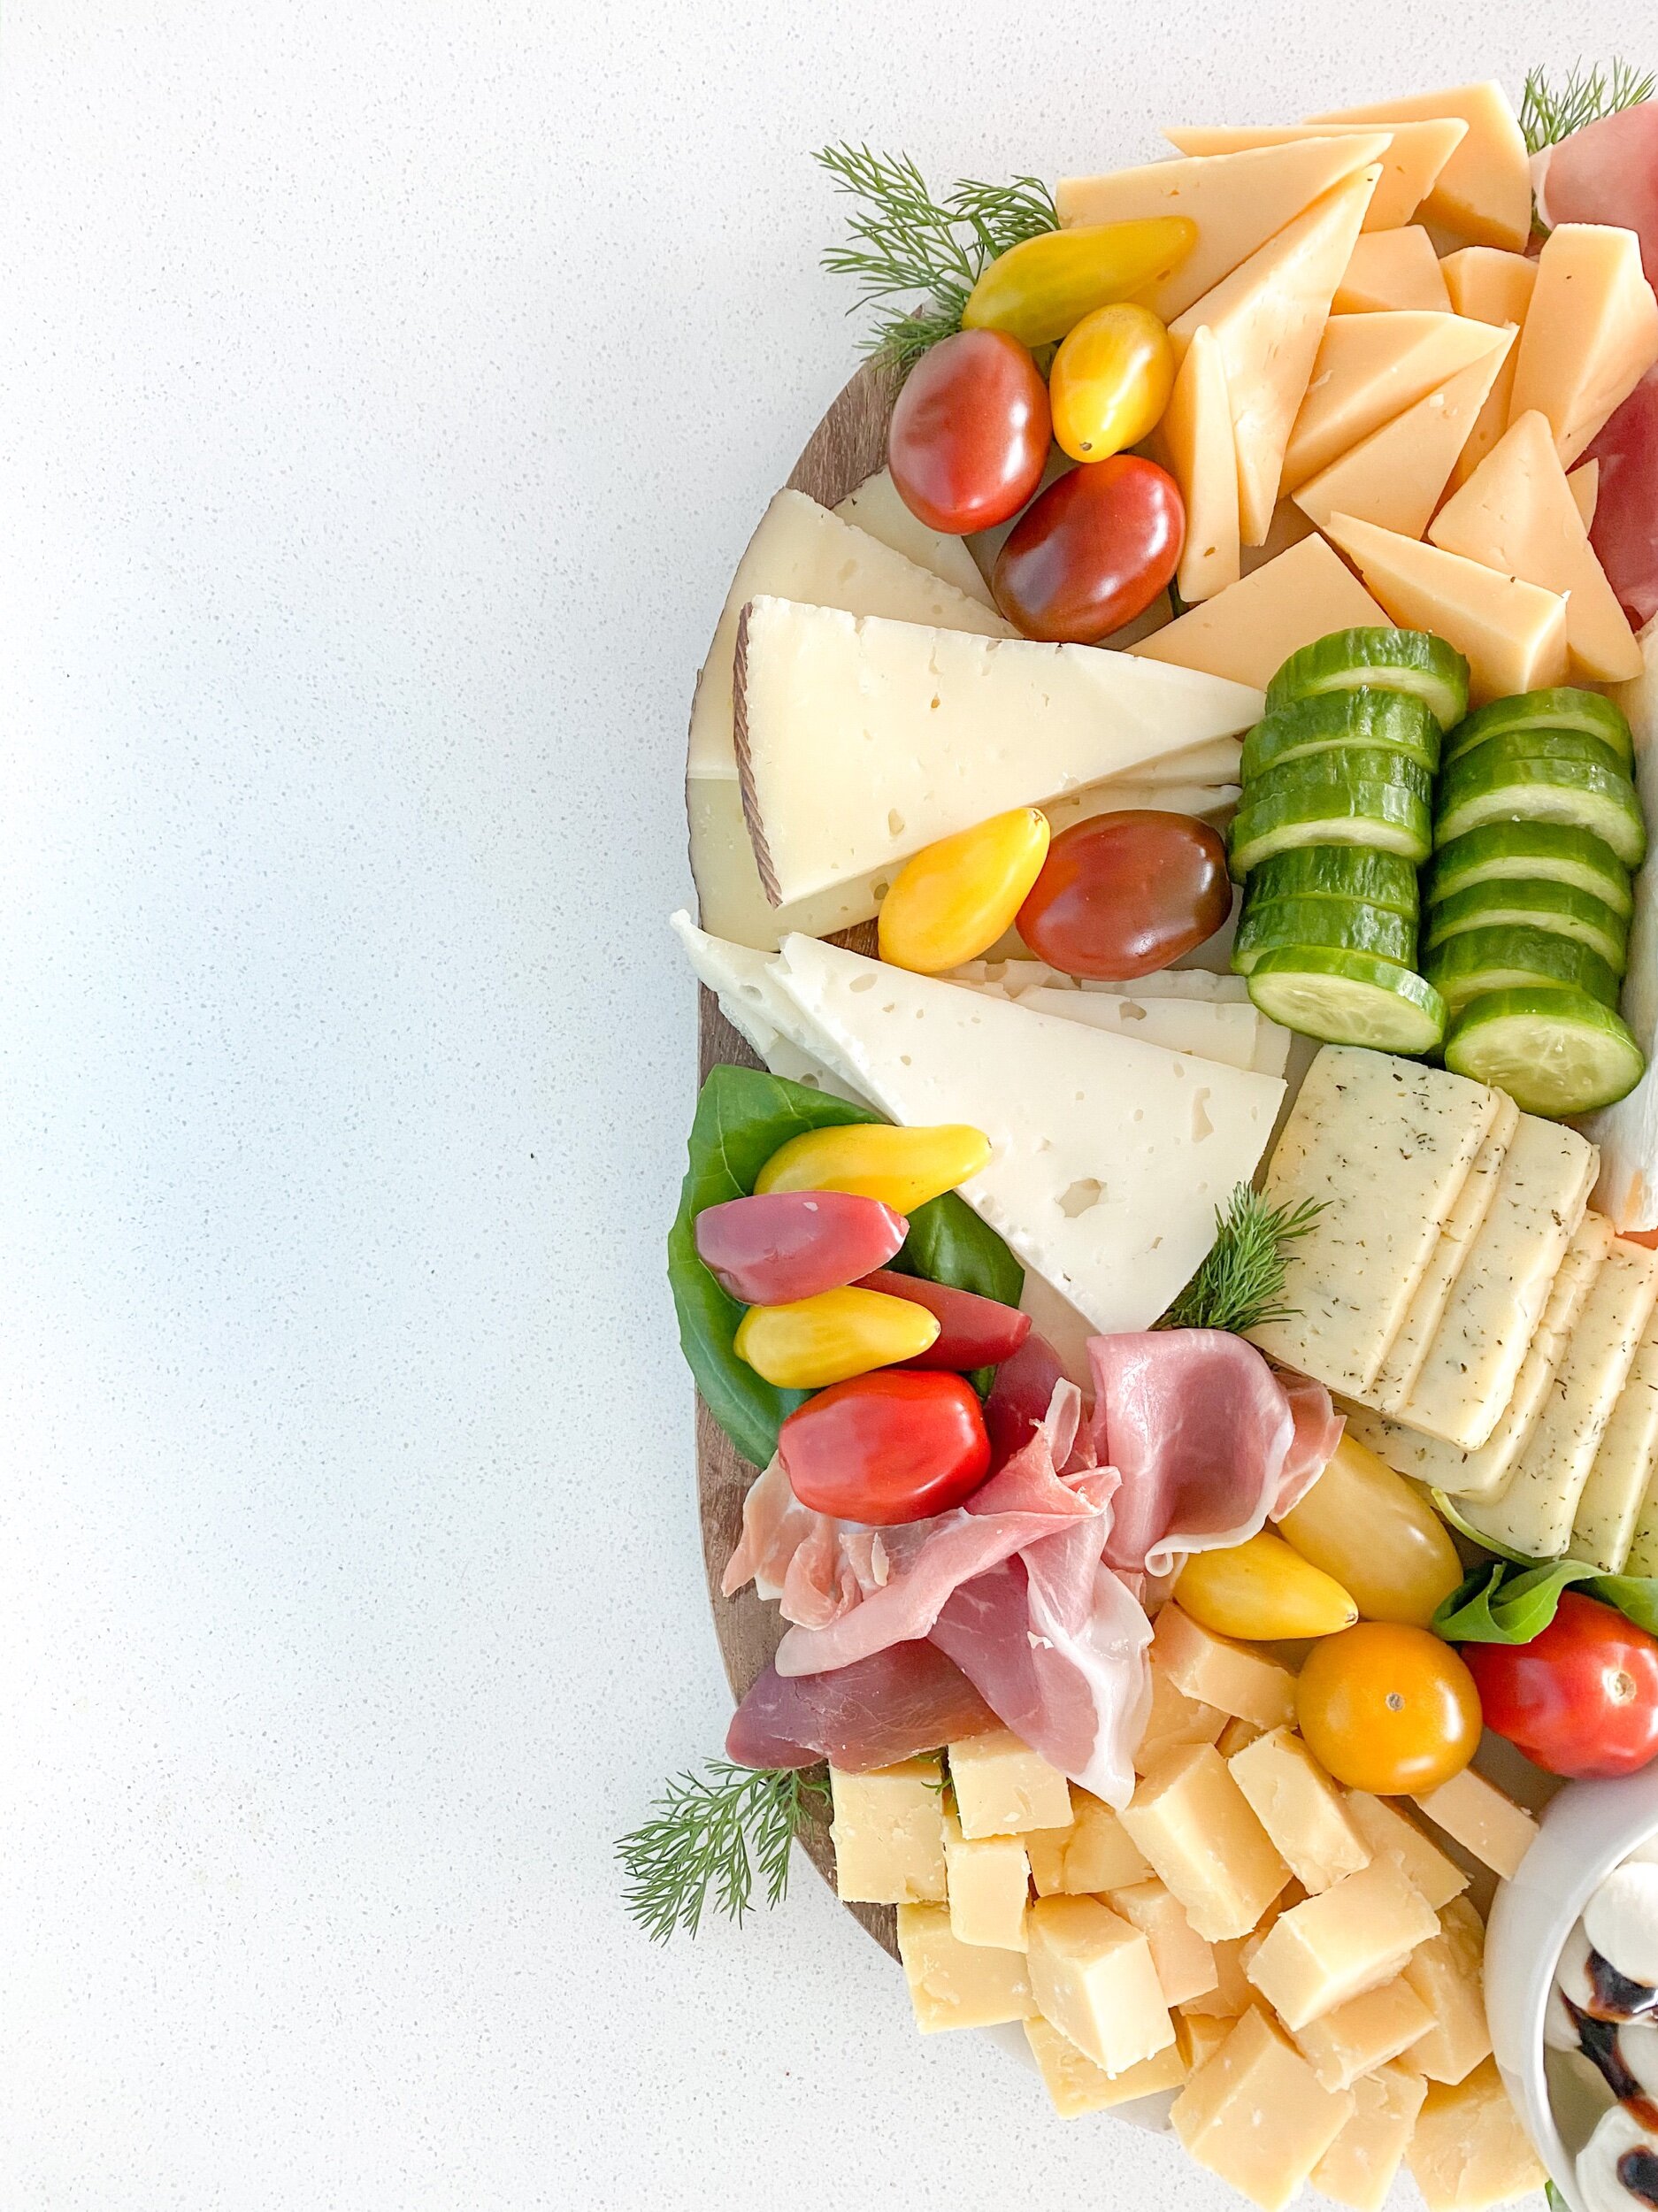 Www.tarynintotravel.com Spring Inspired Charcuterie Board Cheese board Fresh Veggies Easter Springtime Entertaining 